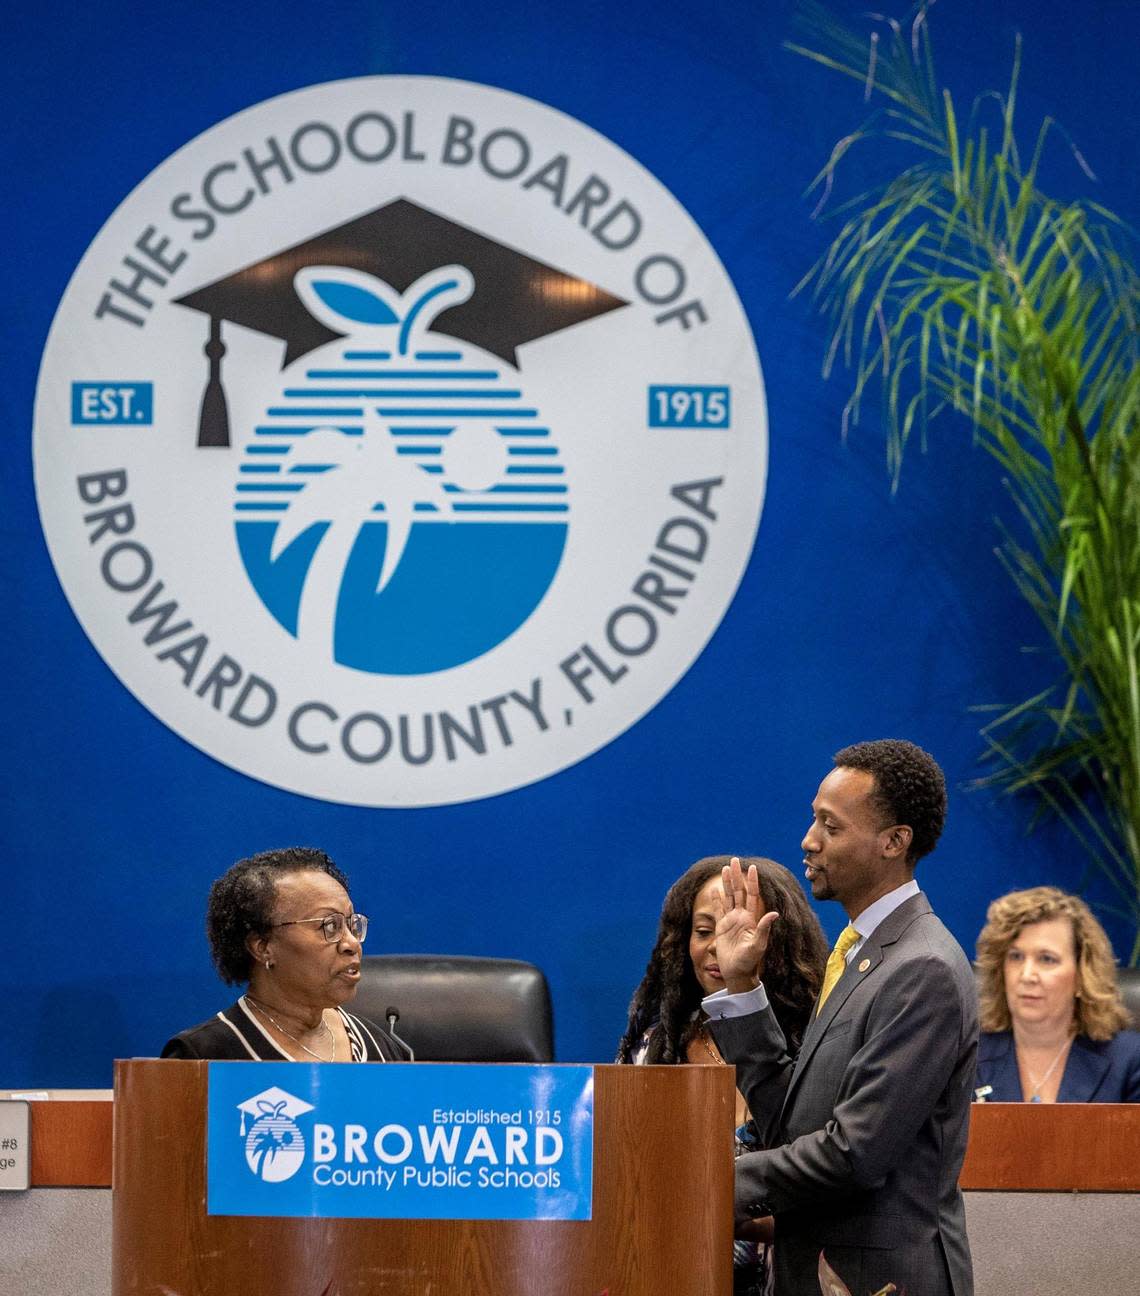 Torey Alston, District 2, raises his right hand as Dr. Earline Smiley administers the oath during an Aug. 30, 2022, swearing-in ceremony at the Kathleen C. Wright Administration Center, 600 SE Third Ave. in Fort Lauderdale. Alston is one of four Broward School Board members appointed by Gov. Ron DeSantis on Aug. 26 after he suspended four sitting board members. Alston is the new chair.